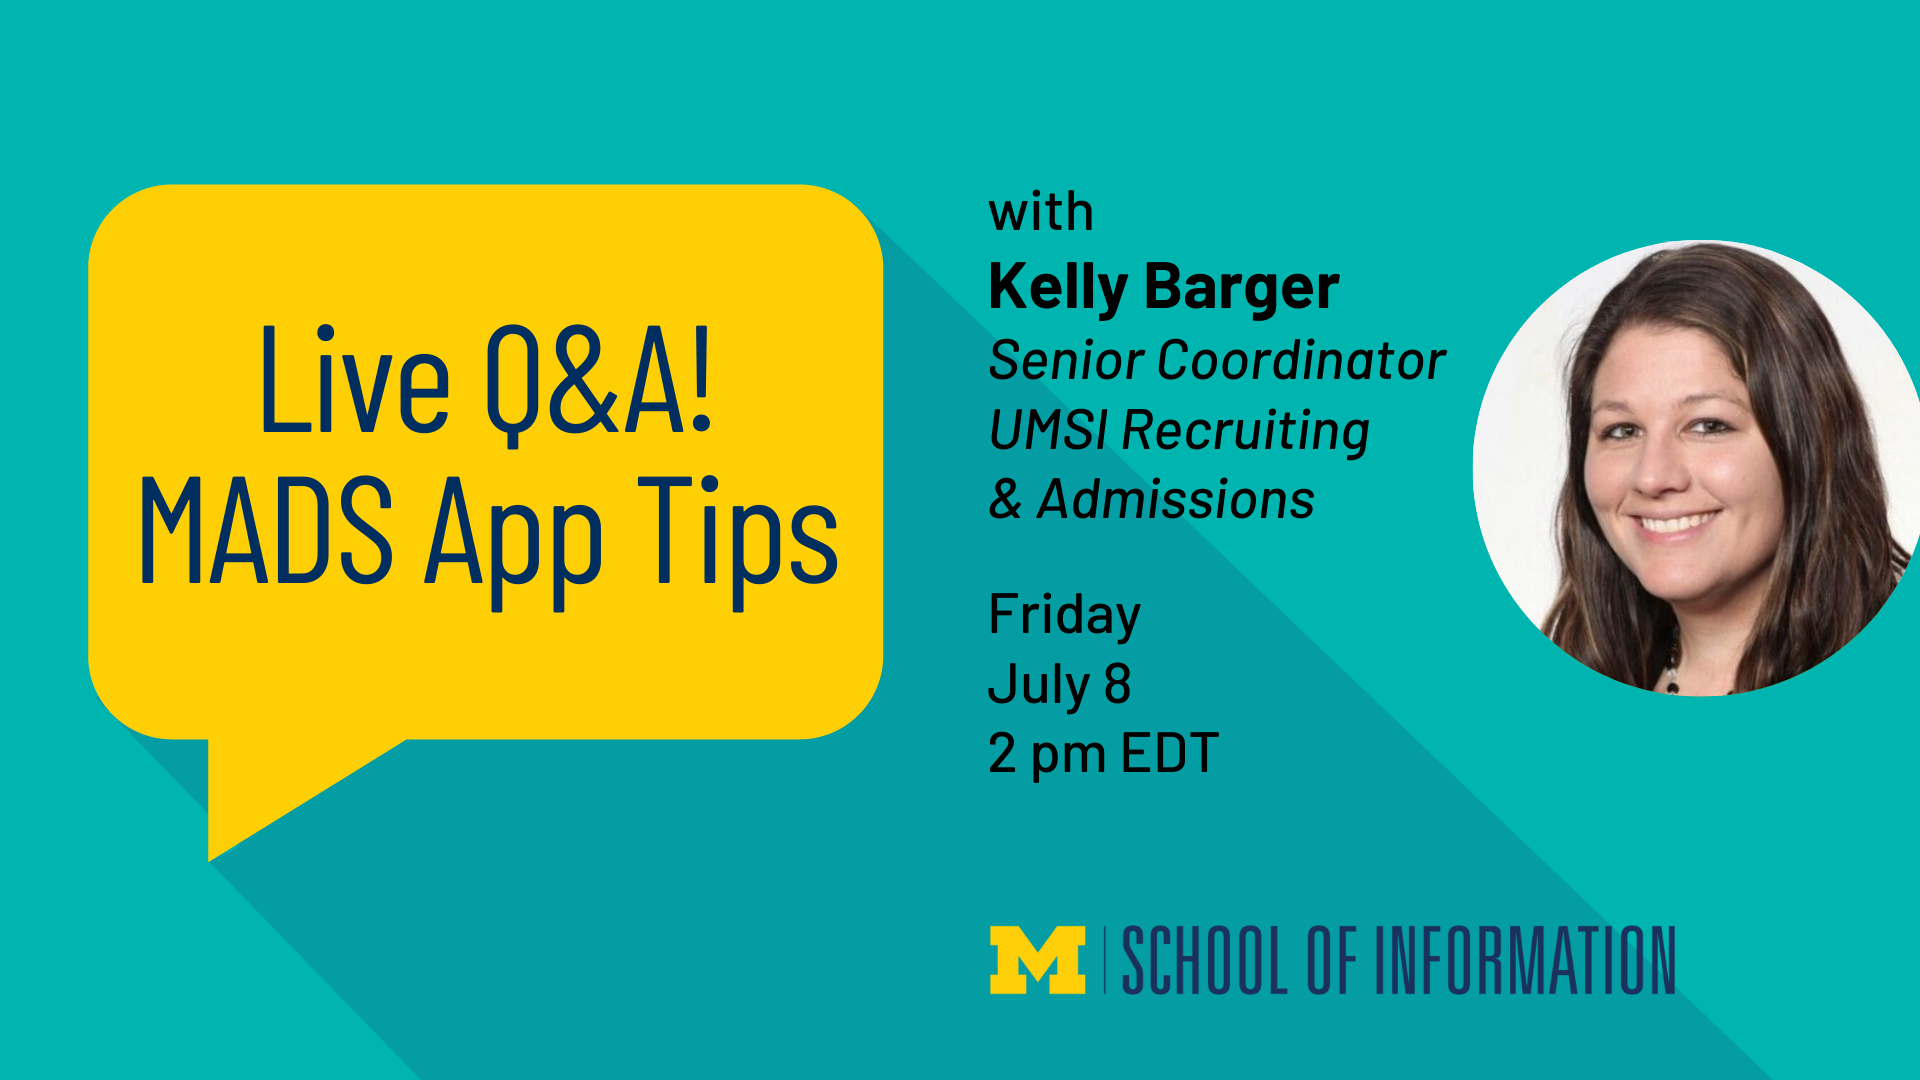 “Live Q&A! MADS App Tips with Kelly Barger. Senior Coordinator, UMSI Recruiting & Admissions. Friday, July 8. 2 pm EDT.”